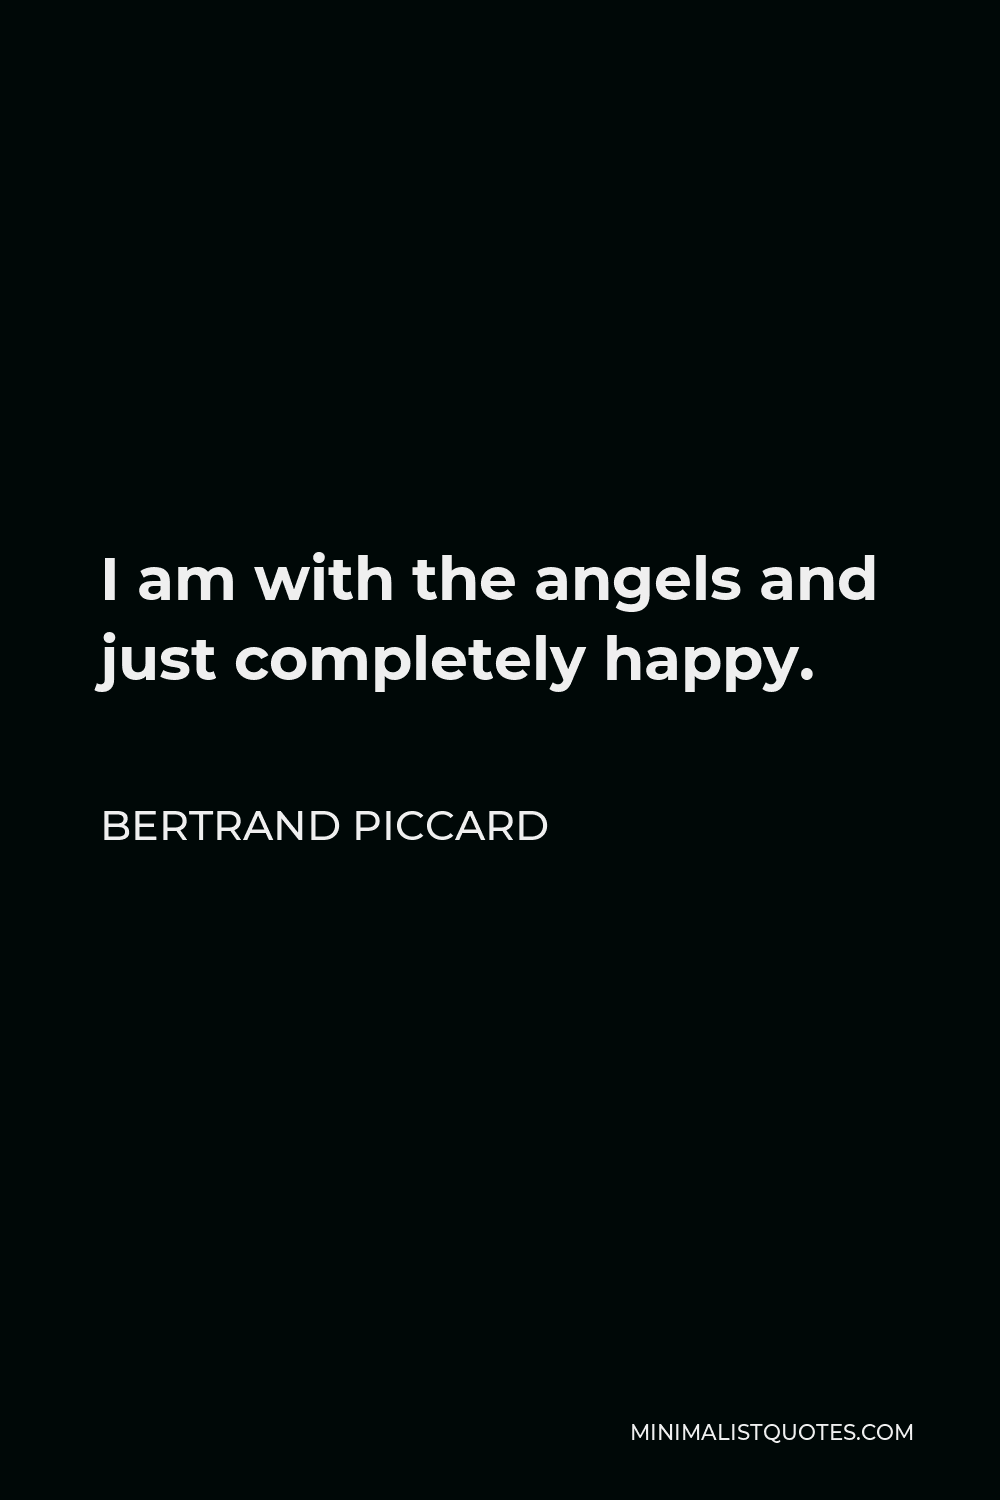 Bertrand Piccard Quote - I am with the angels and just completely happy.